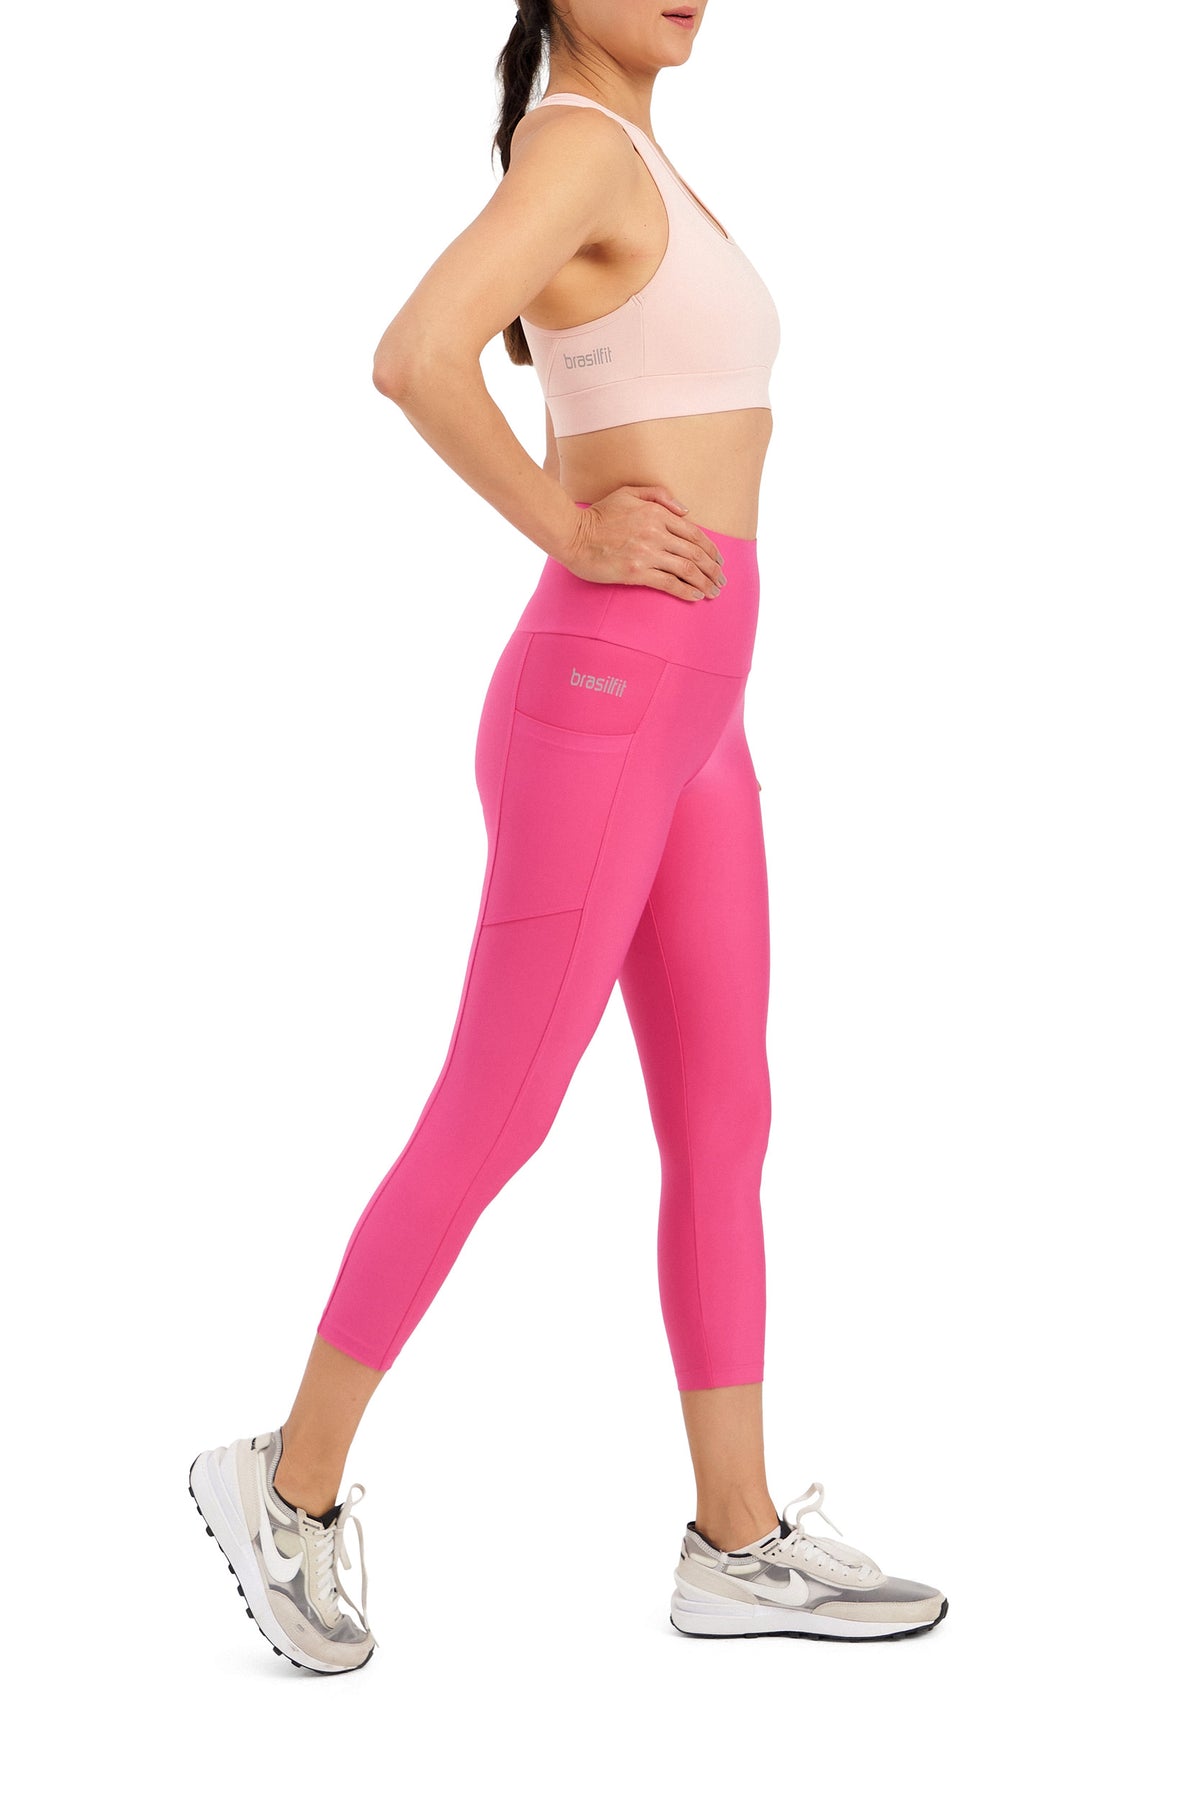 High waisted Mid Calf Leggings with Pockets - High support printed shorts-  Brasilfit Activewear